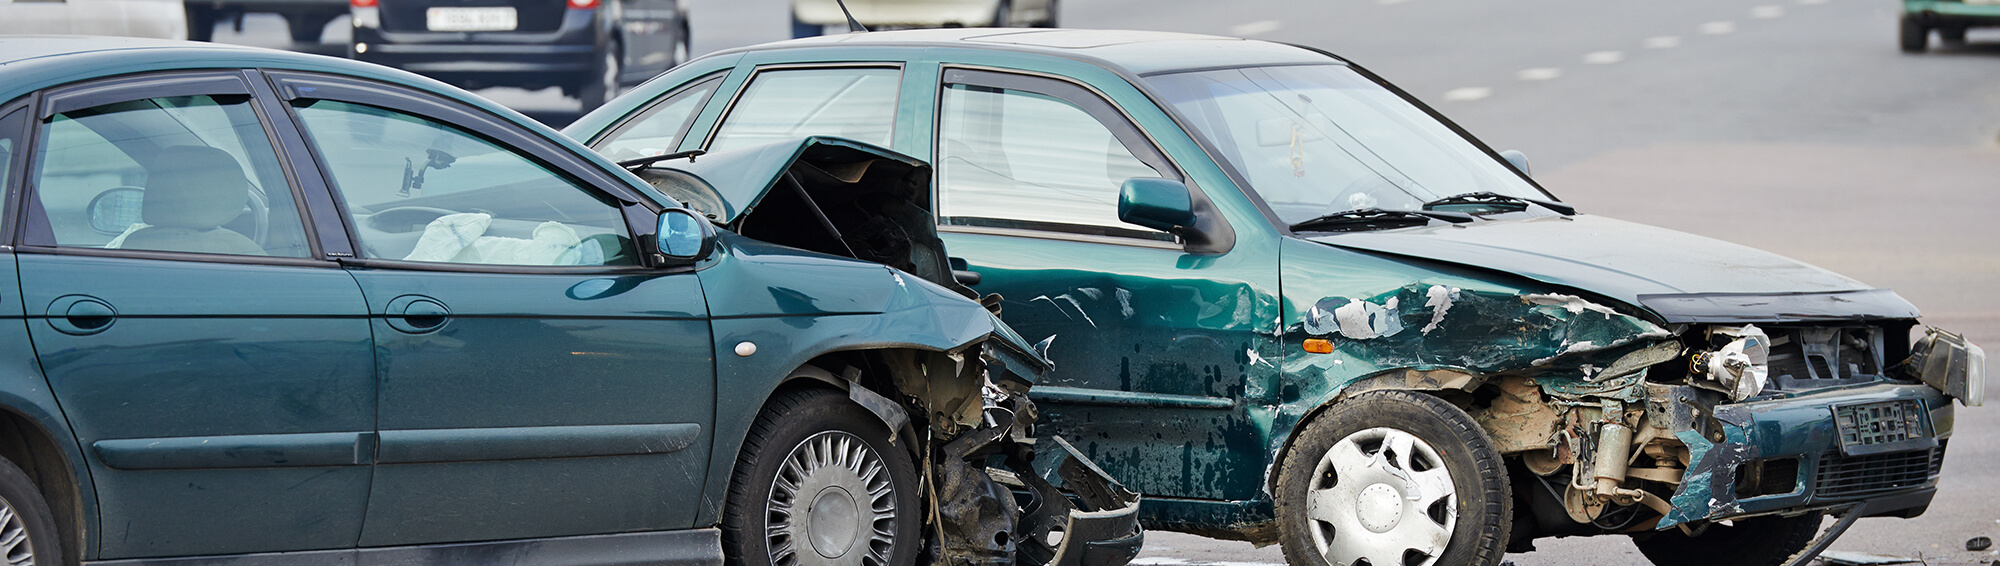 Medical Bills After Auto Accidents Can Quickly Add Up.